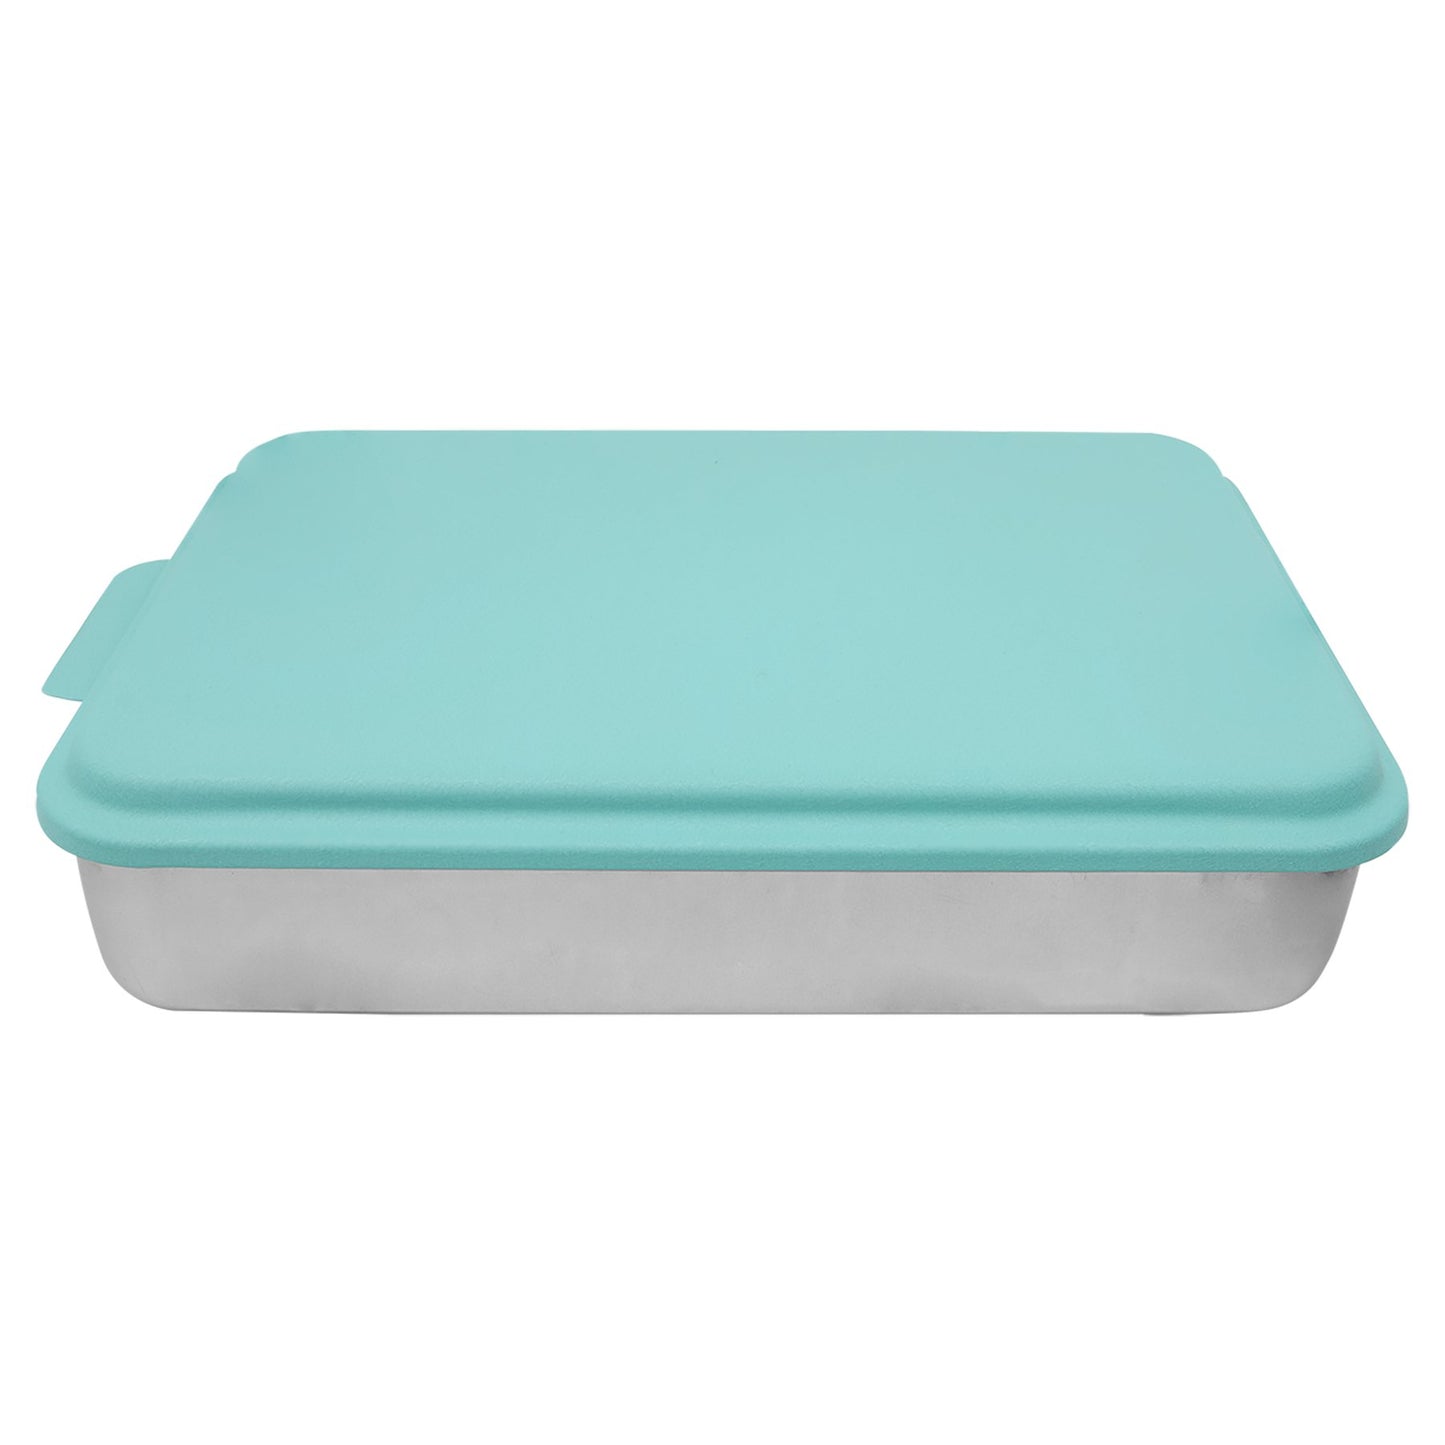 https://www.etchified.com/cdn/shop/products/personalized-9x13-cake-pan-with-snap-on-lid-bpn102-934795.jpg?v=1695224480&width=1445